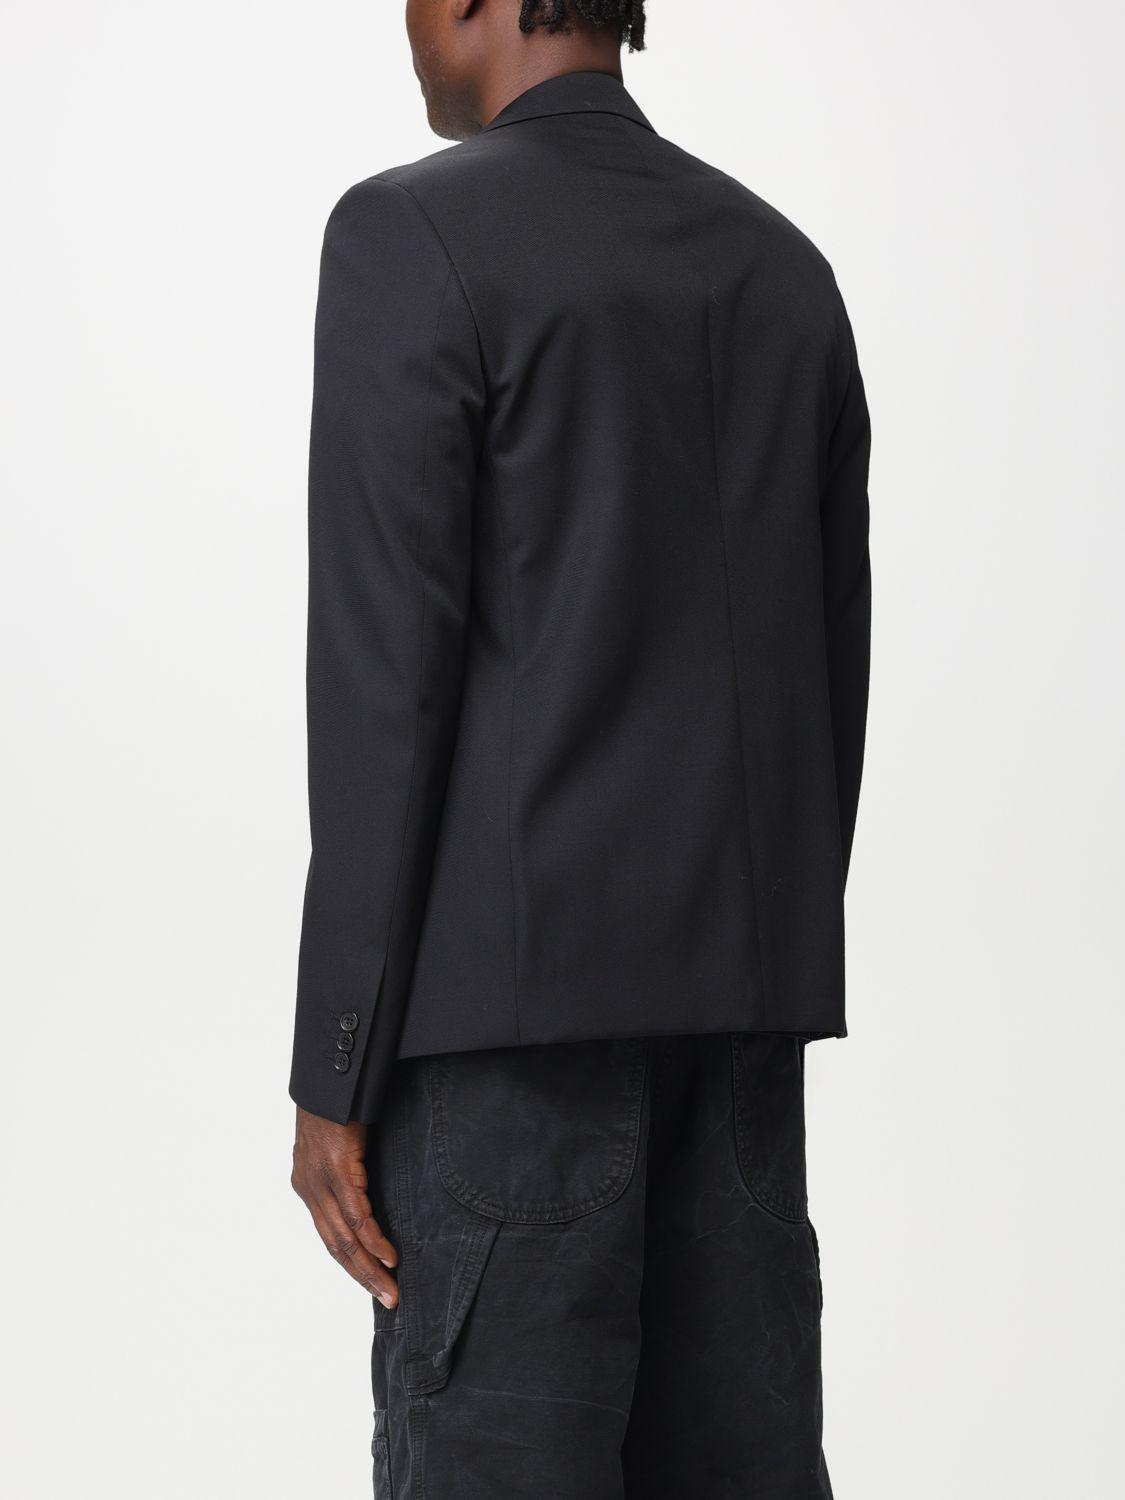 Off-White c/o Virgil Abloh Blazer With Buckle in Blue for Men